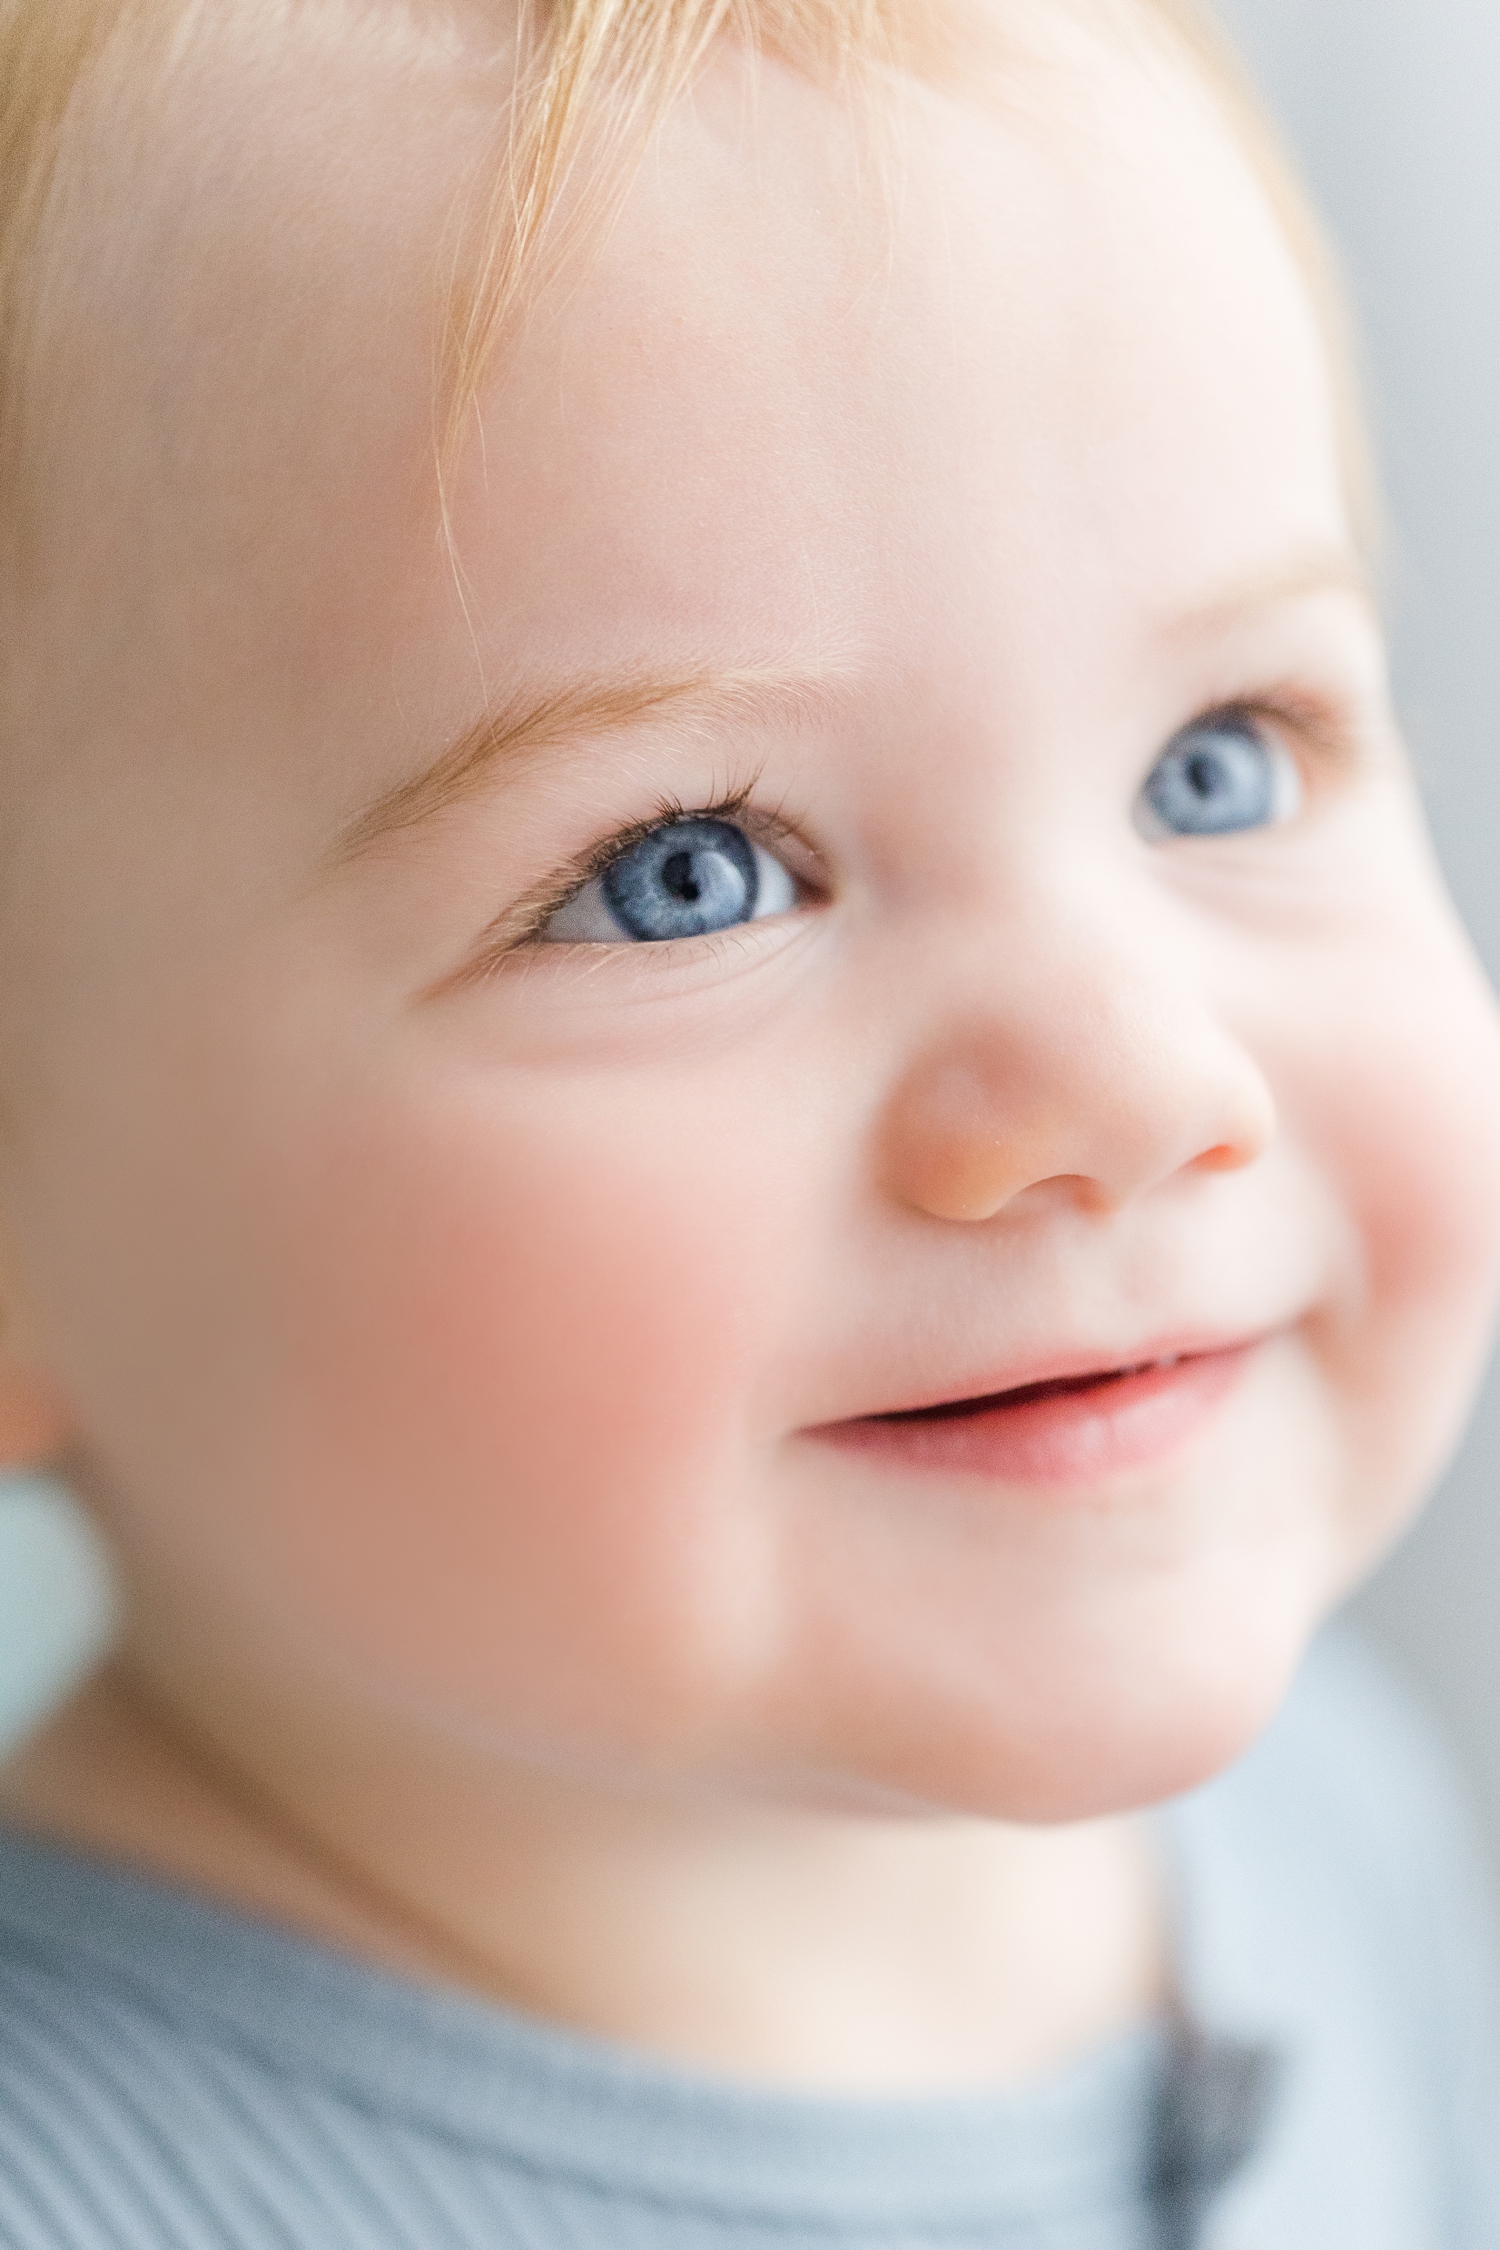 Closeup details of Baby Lewis's smiling face and bright blue eyes | CB Studio